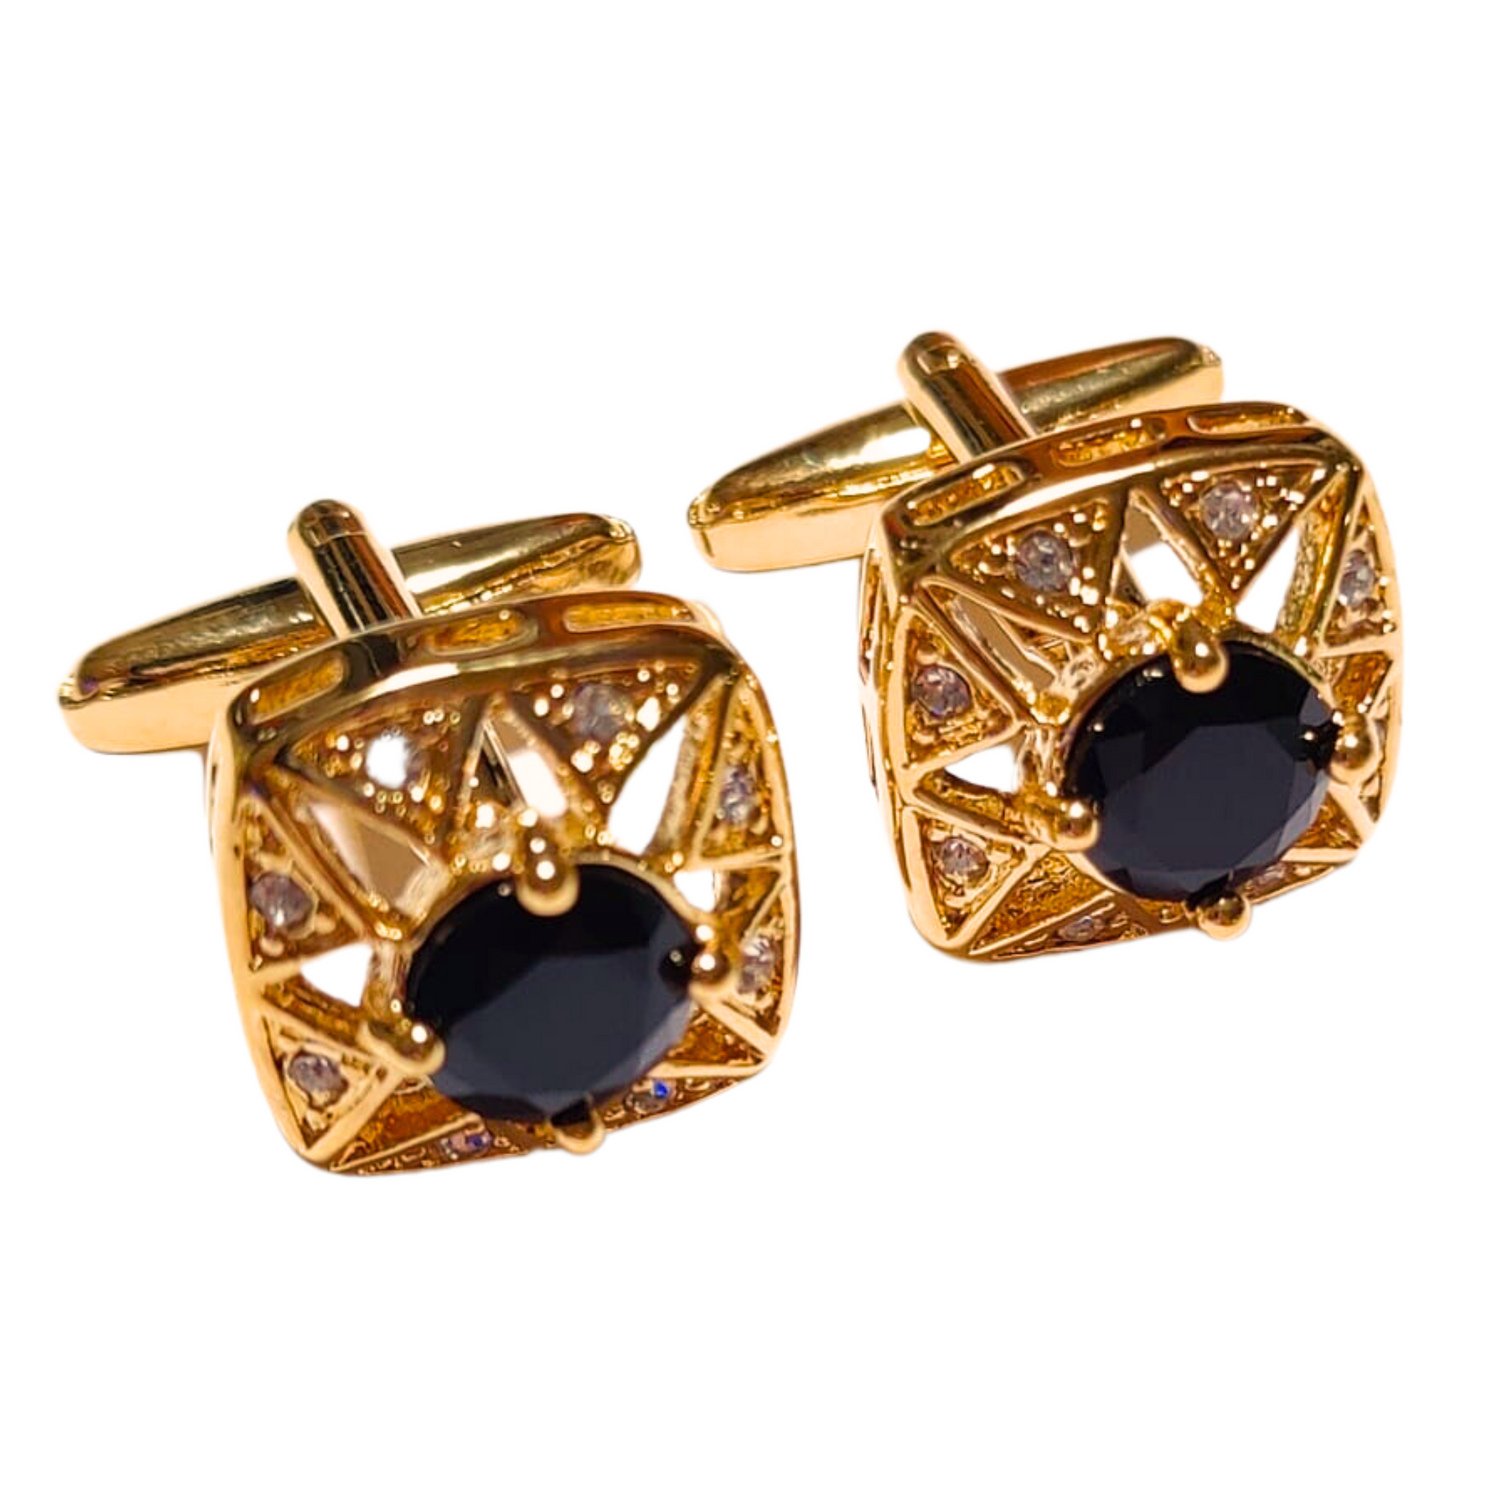 Gold with Black Stone Royal Cufflinks